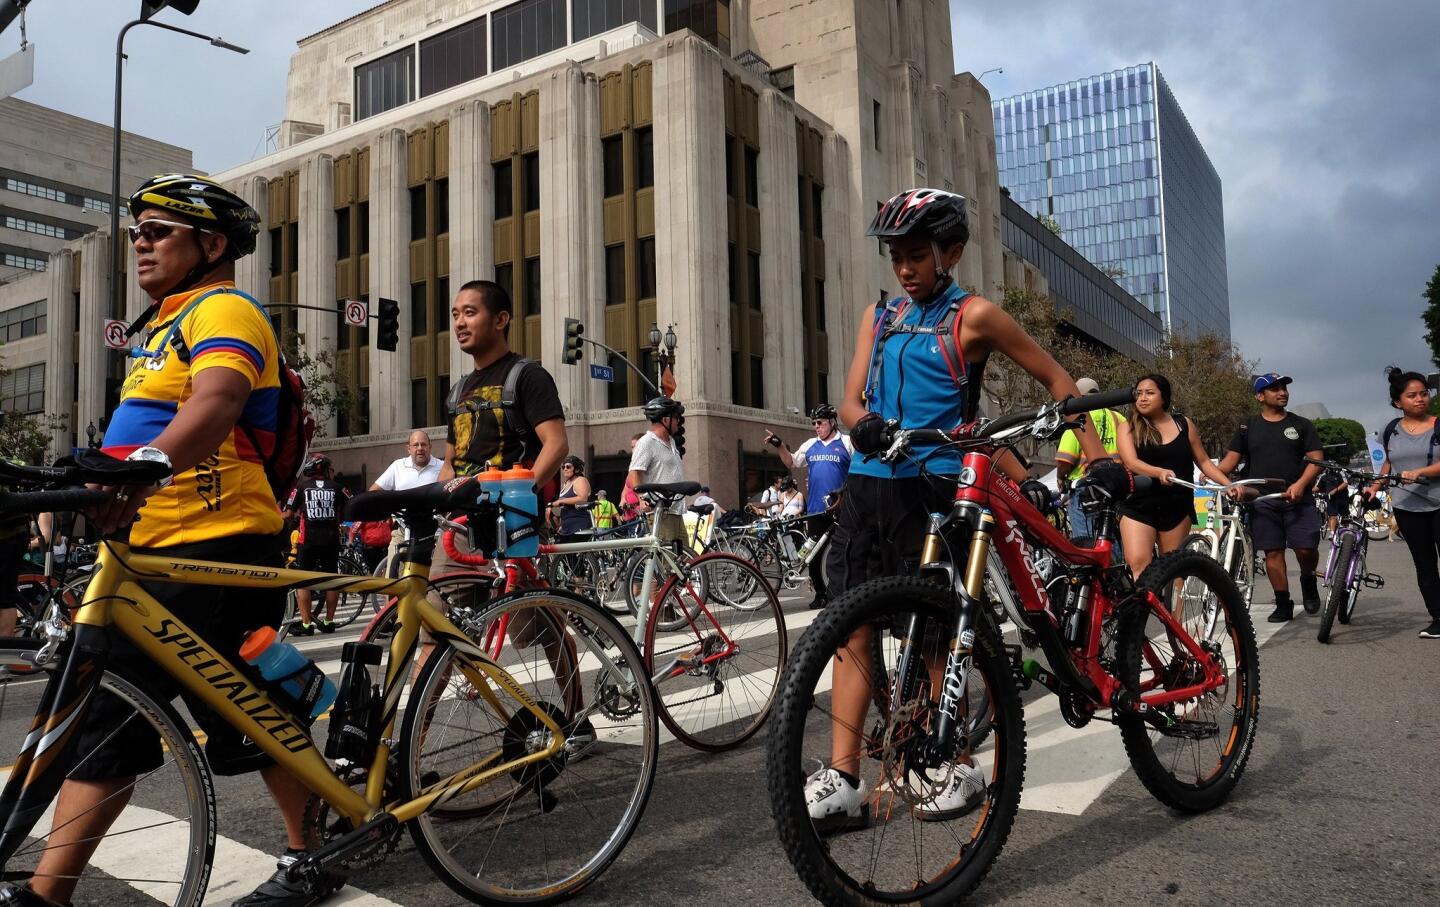 Cyclists walk their bikes through an intersection of downtown Los Angeles on Sunday, Oct. 18, 2015. It's a car free day in parts of LA and some six miles of streets in and around downtown Los Angeles are closed to motor vehicles as the city's fifth anniversary celebration of the CicLAvia festival opens the lanes to cyclists. (AP Photo/Richard Vogel)